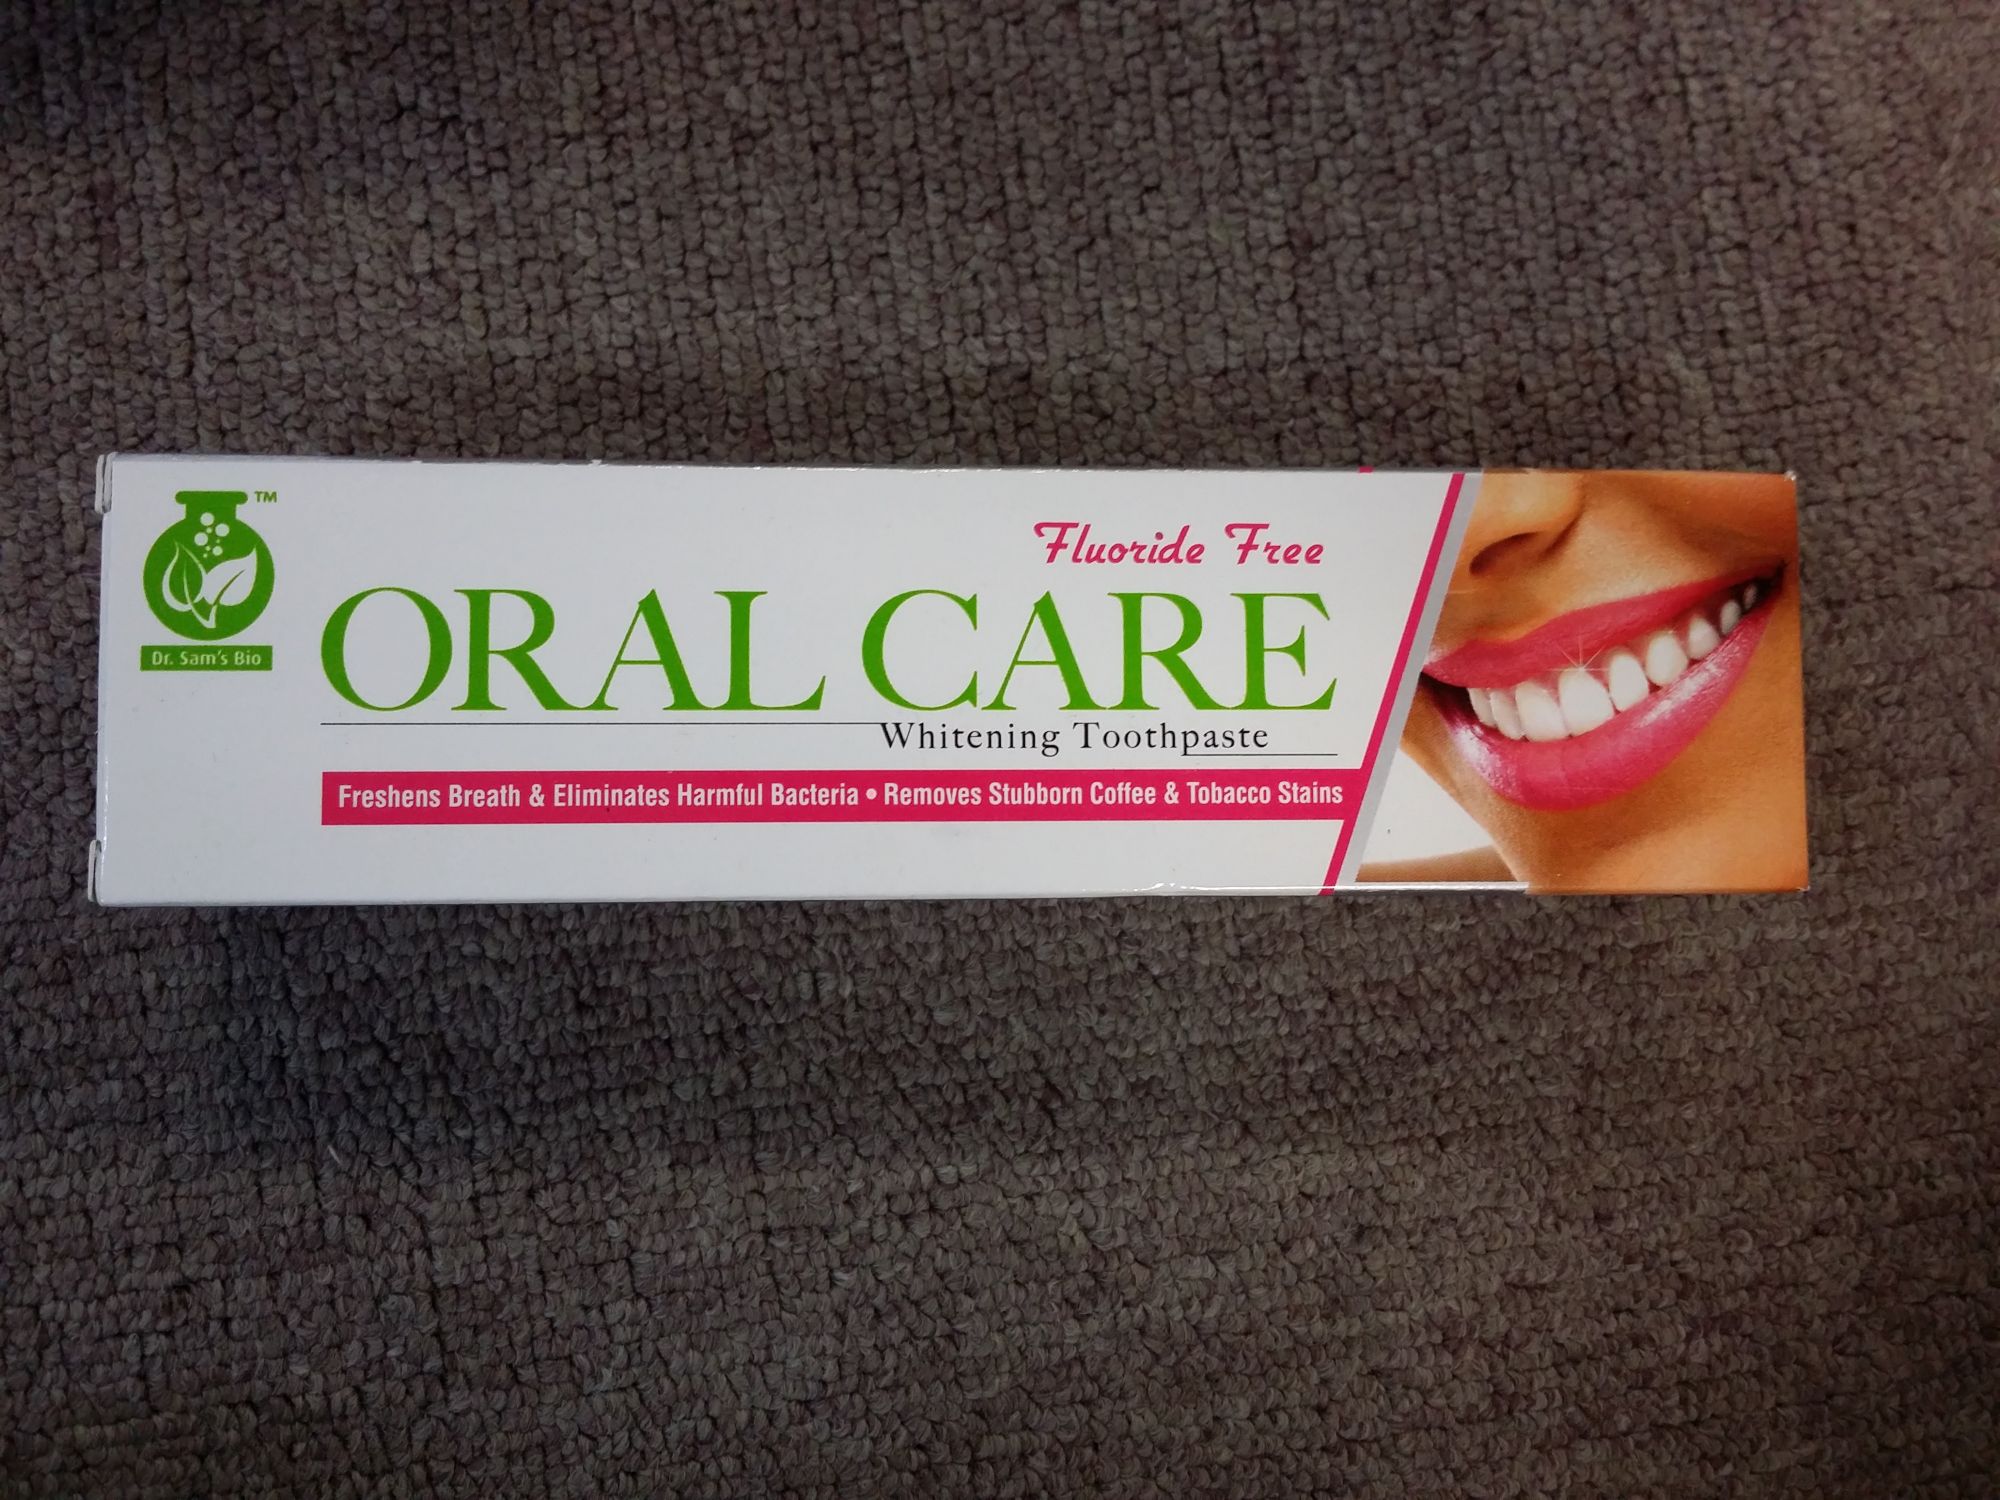 Dr. Sam's Fluoride Free Whitening Toothpaste reviews